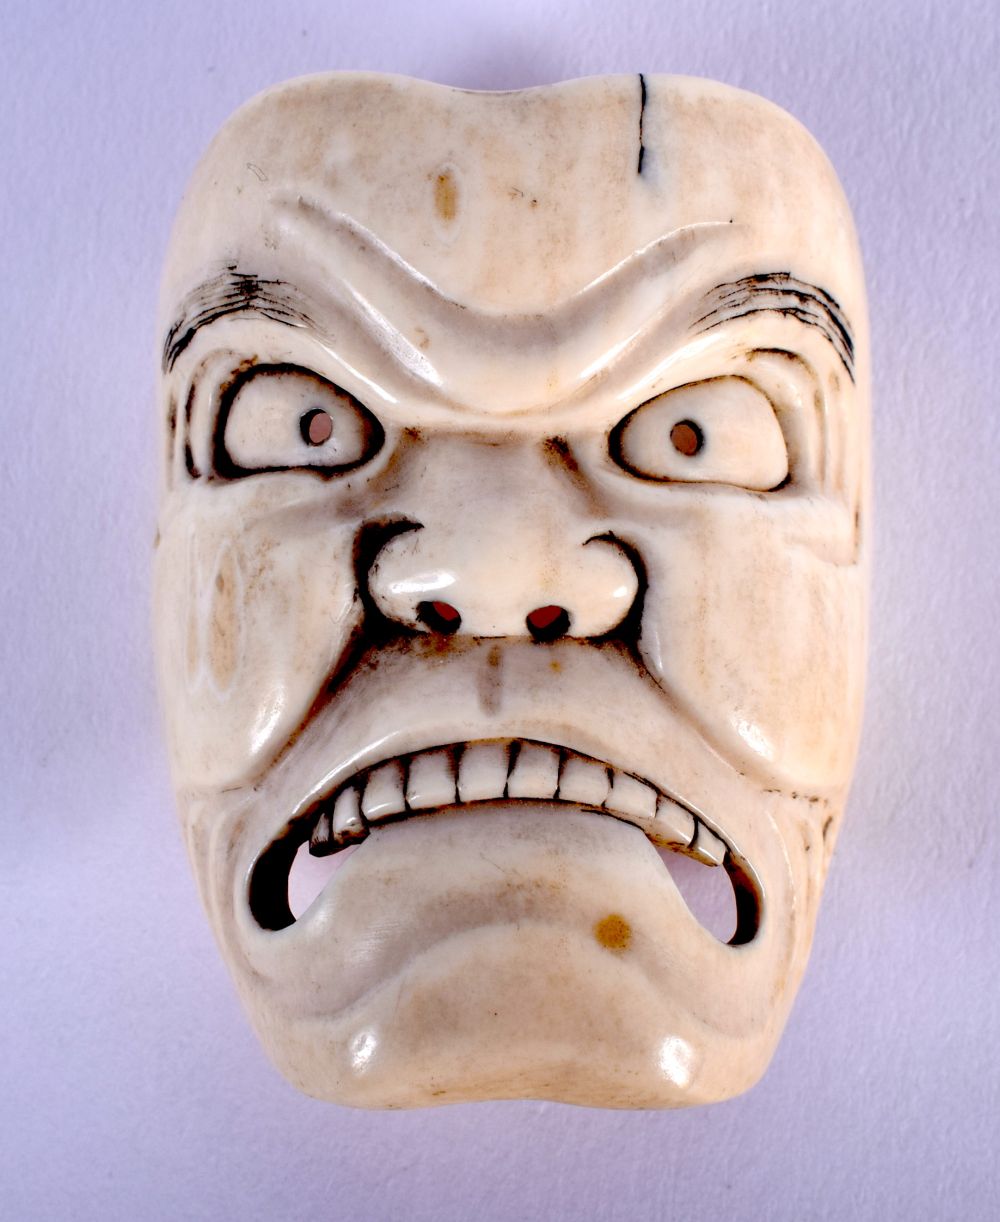 A 19TH CENTURY JAPANESE MEIJI PERIOD CARVED IVORY NOH MASK modelled as a scowling face. 4.5 cm x 3.5